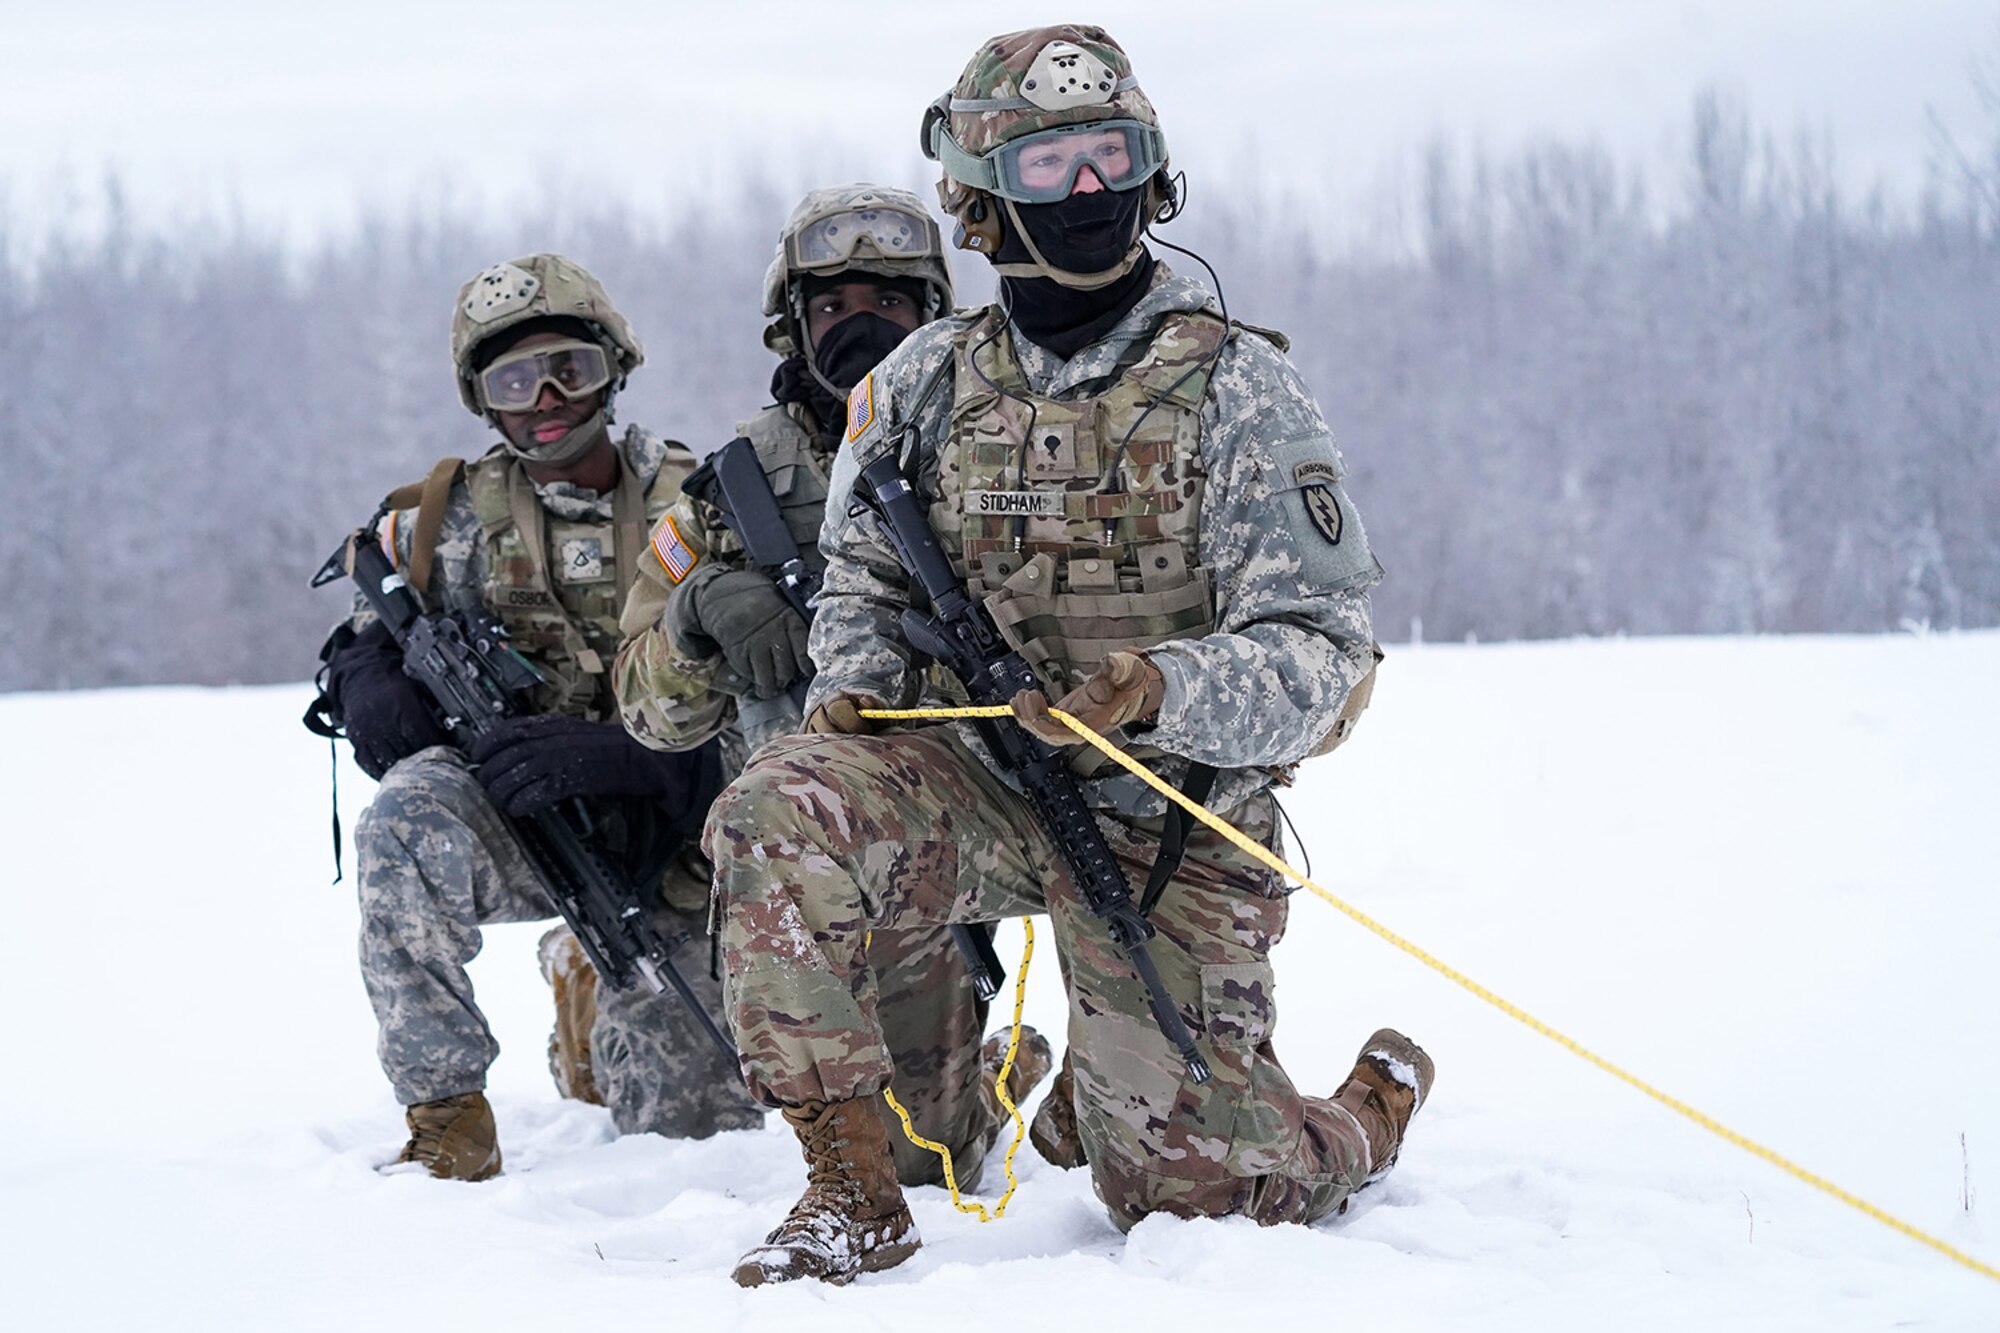 Spc. Eric Stidham assigned to Headquarters and Headquarters Company, 6th Brigade Engineer Battalion (Airborne), 4th Infantry Brigade Combat Team (Airborne), 25th Infantry Division, U.S. Army Alaska, trains with fellow Soldiers and aviators from the Alaska Army National Guard at Neibhur Drop Zone, Nov. 26, 2019, to hone their life-saving and Medevac hoist skills for the paratroopers’ upcoming rotation to the Joint Readiness Training Center at Fort Polk, La.